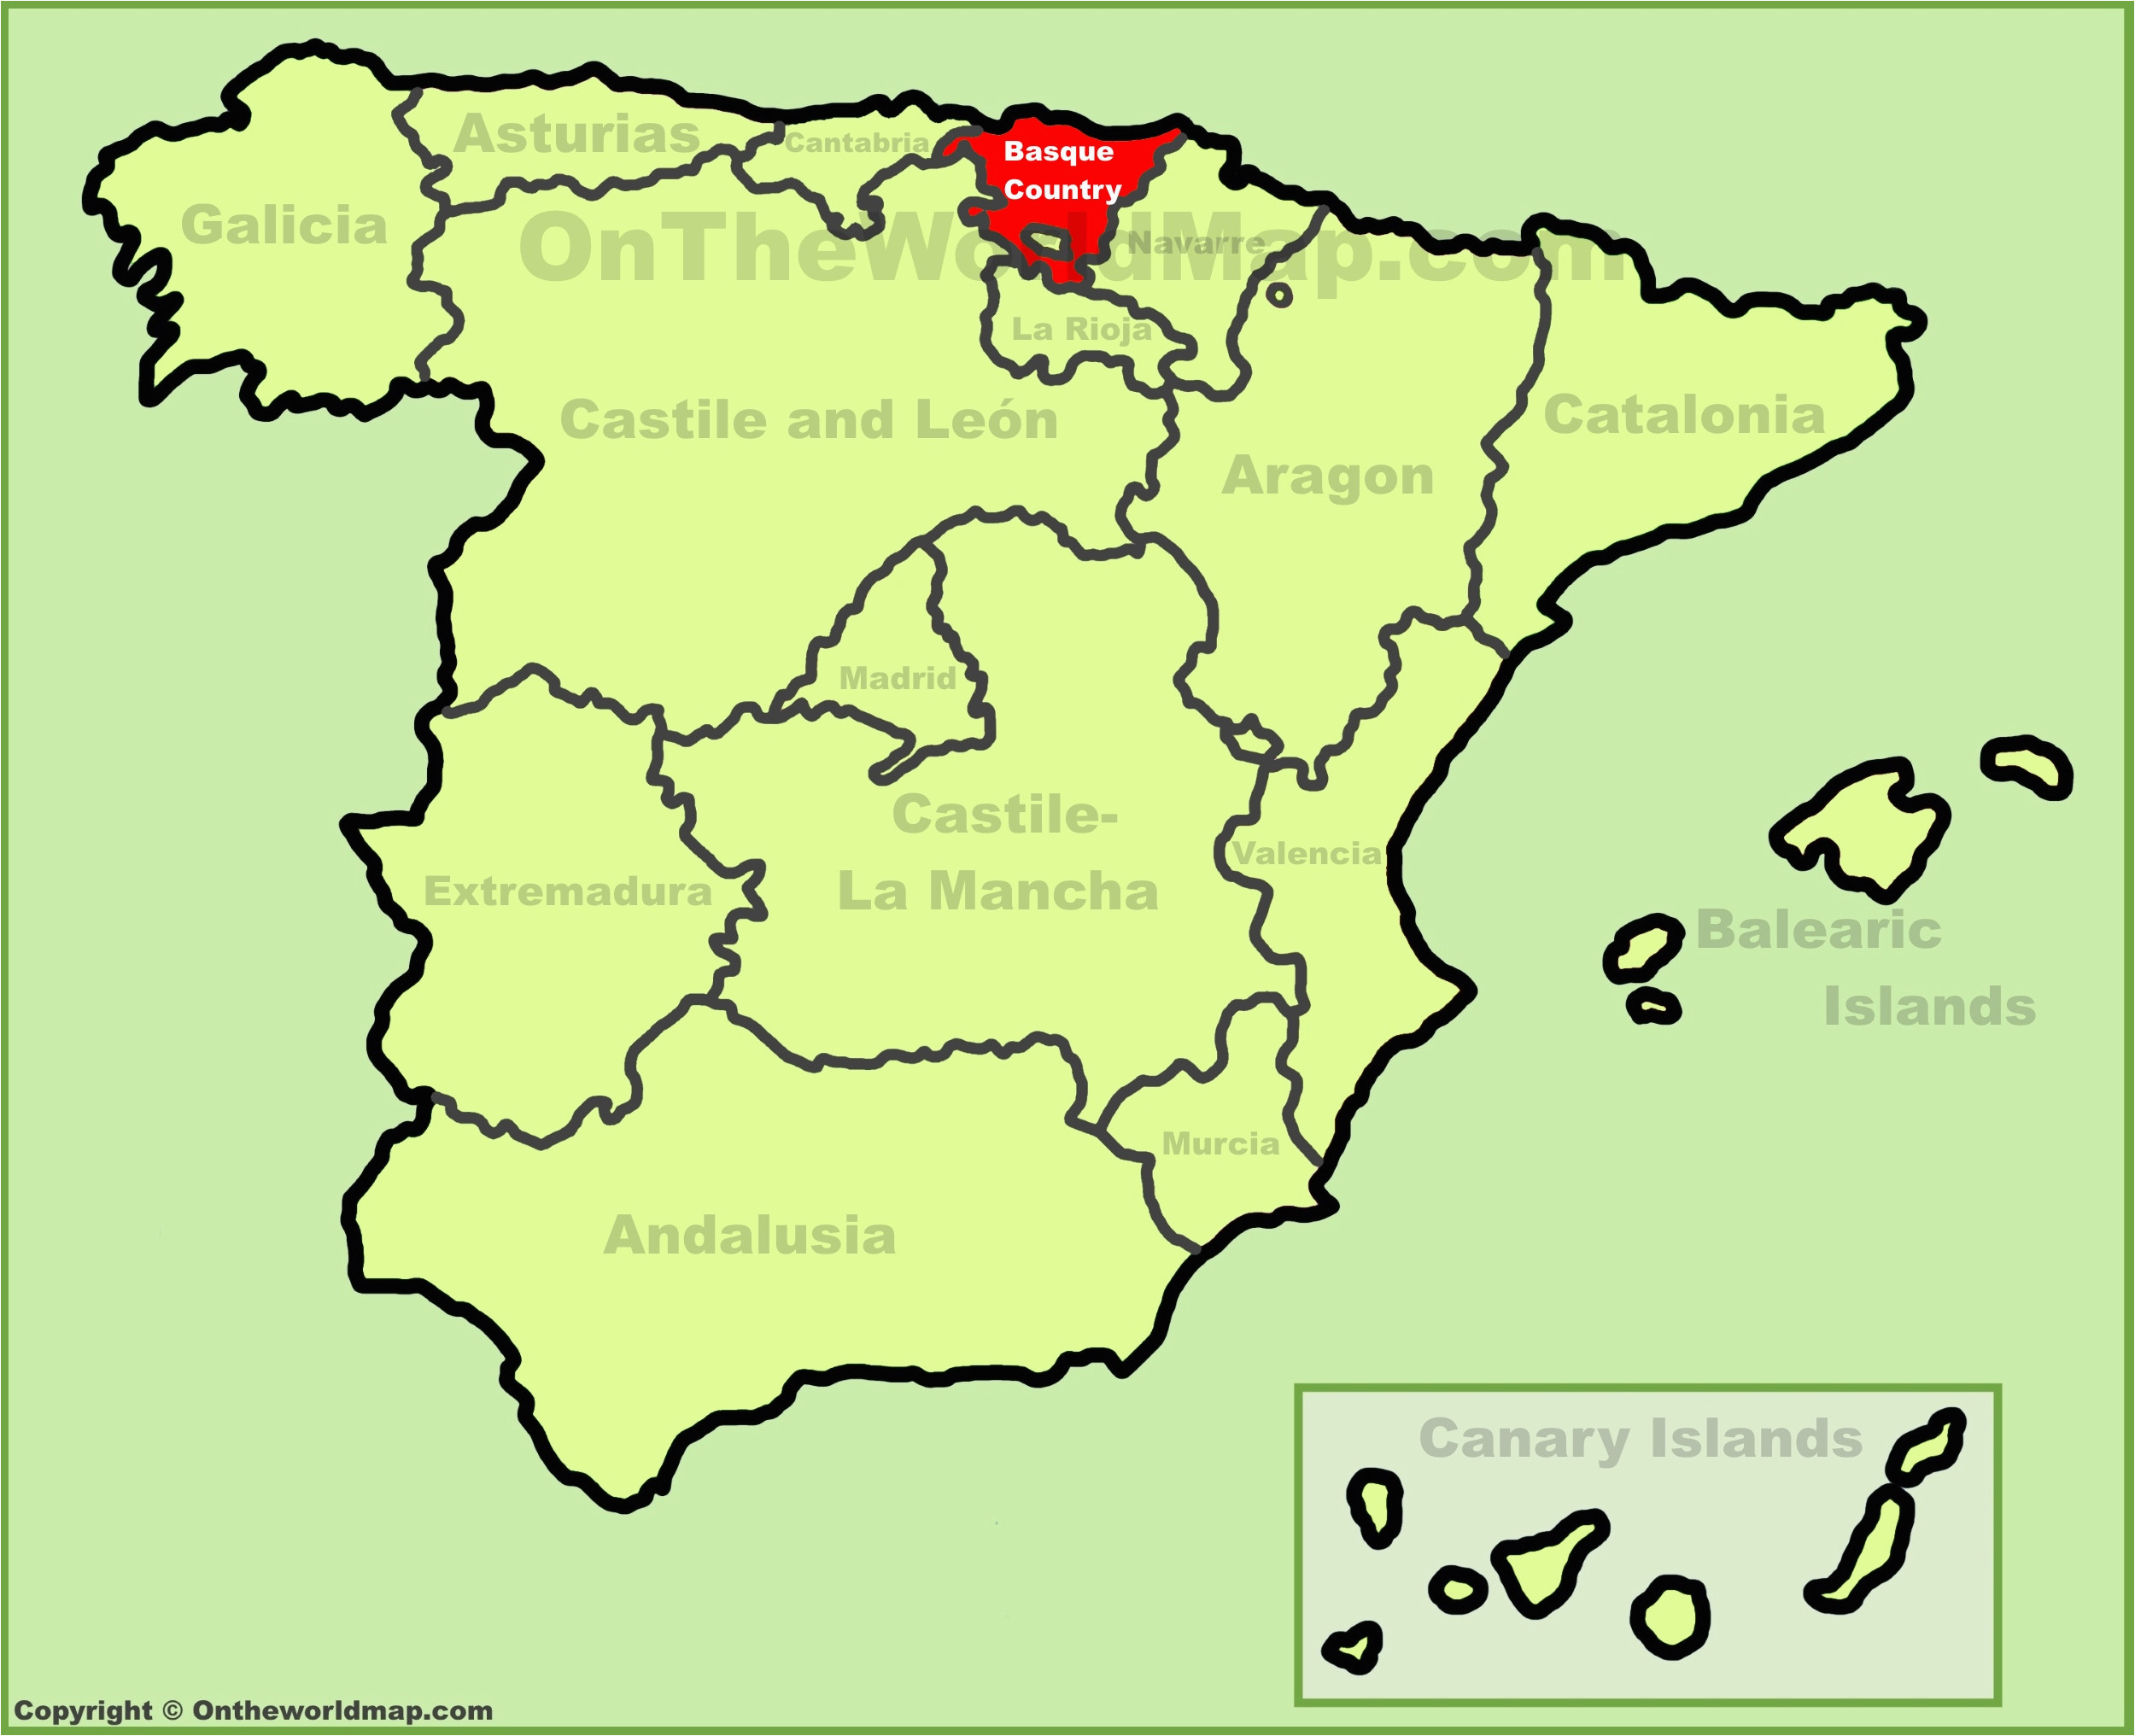 Basque Region Spain Map Basques Map and Travel Information Download Free Basques Map